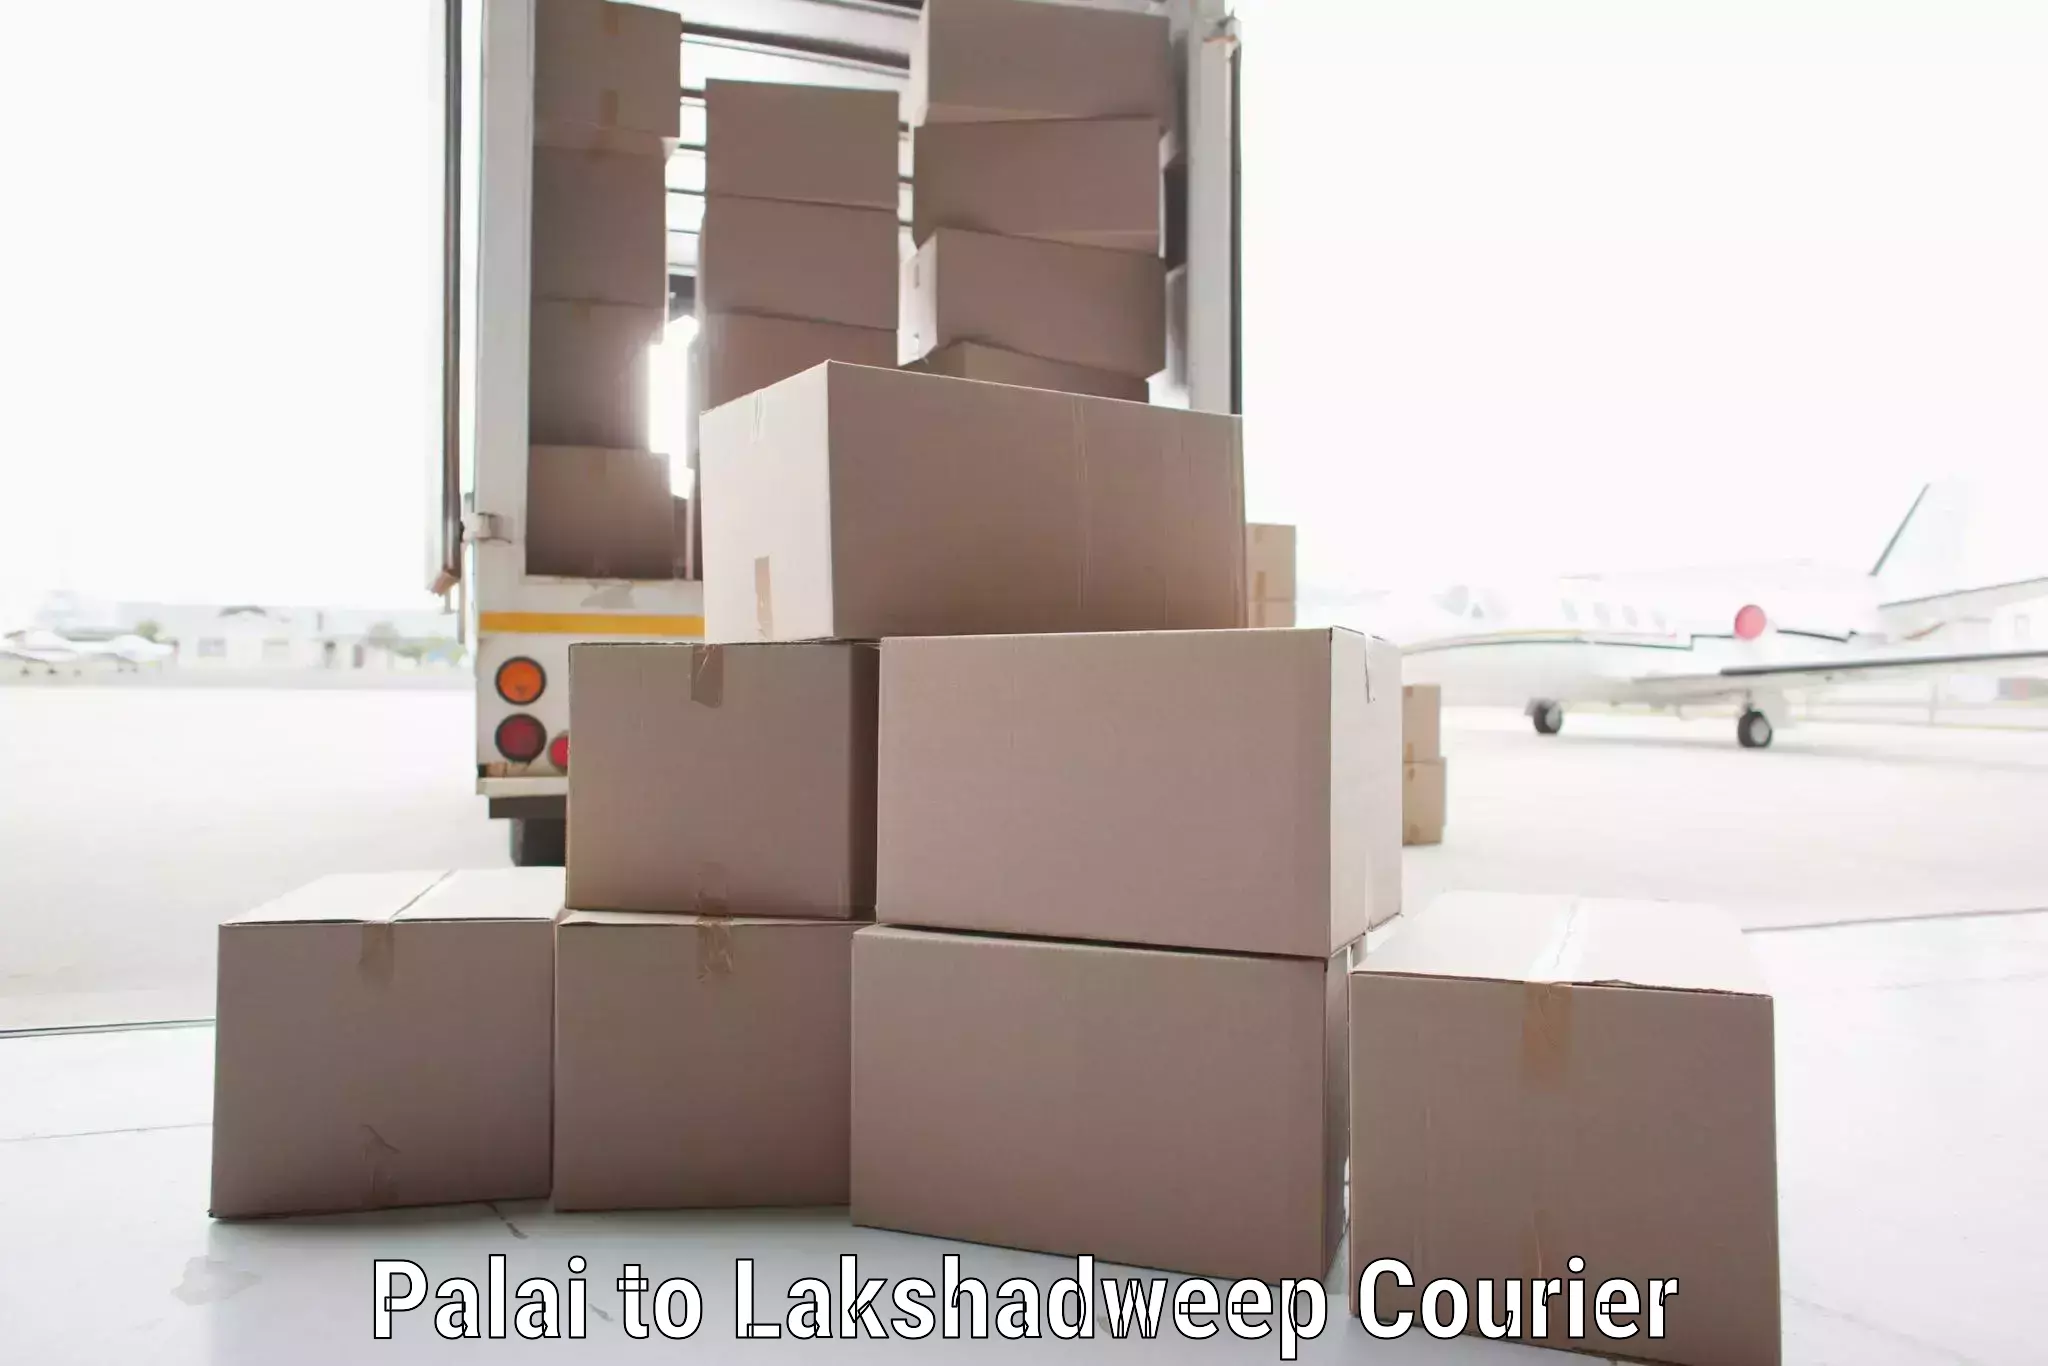 Nationwide courier service Palai to Lakshadweep